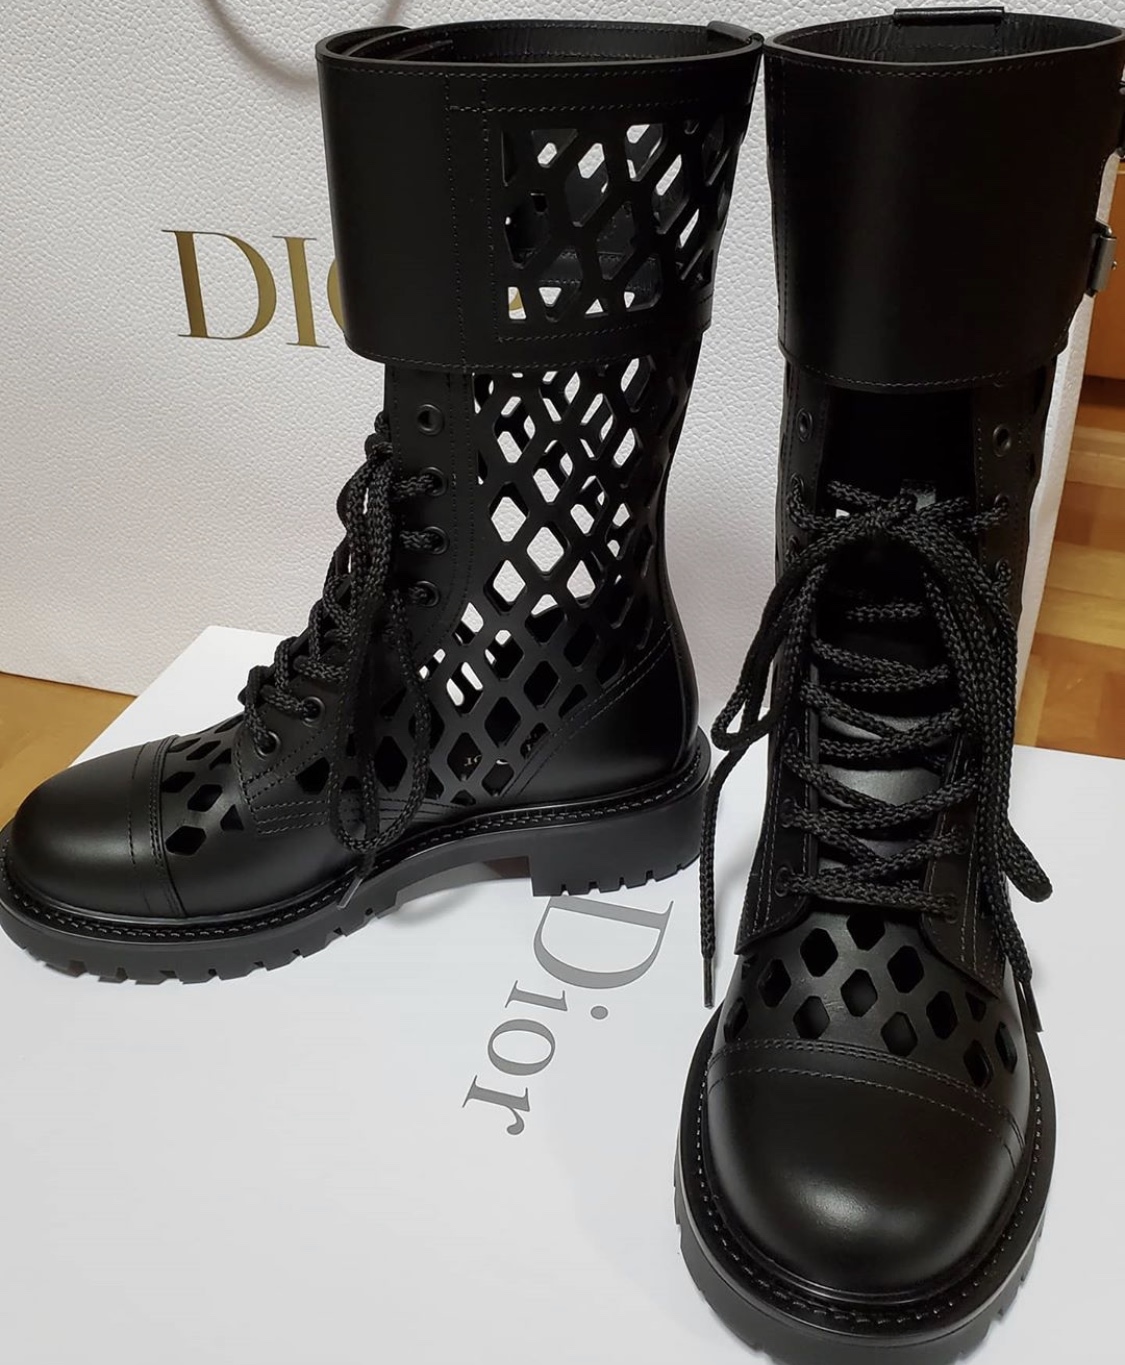 Accor for example believe Bomb Product of the Day: Fishnet Cutout D-Trap Boots by Dior